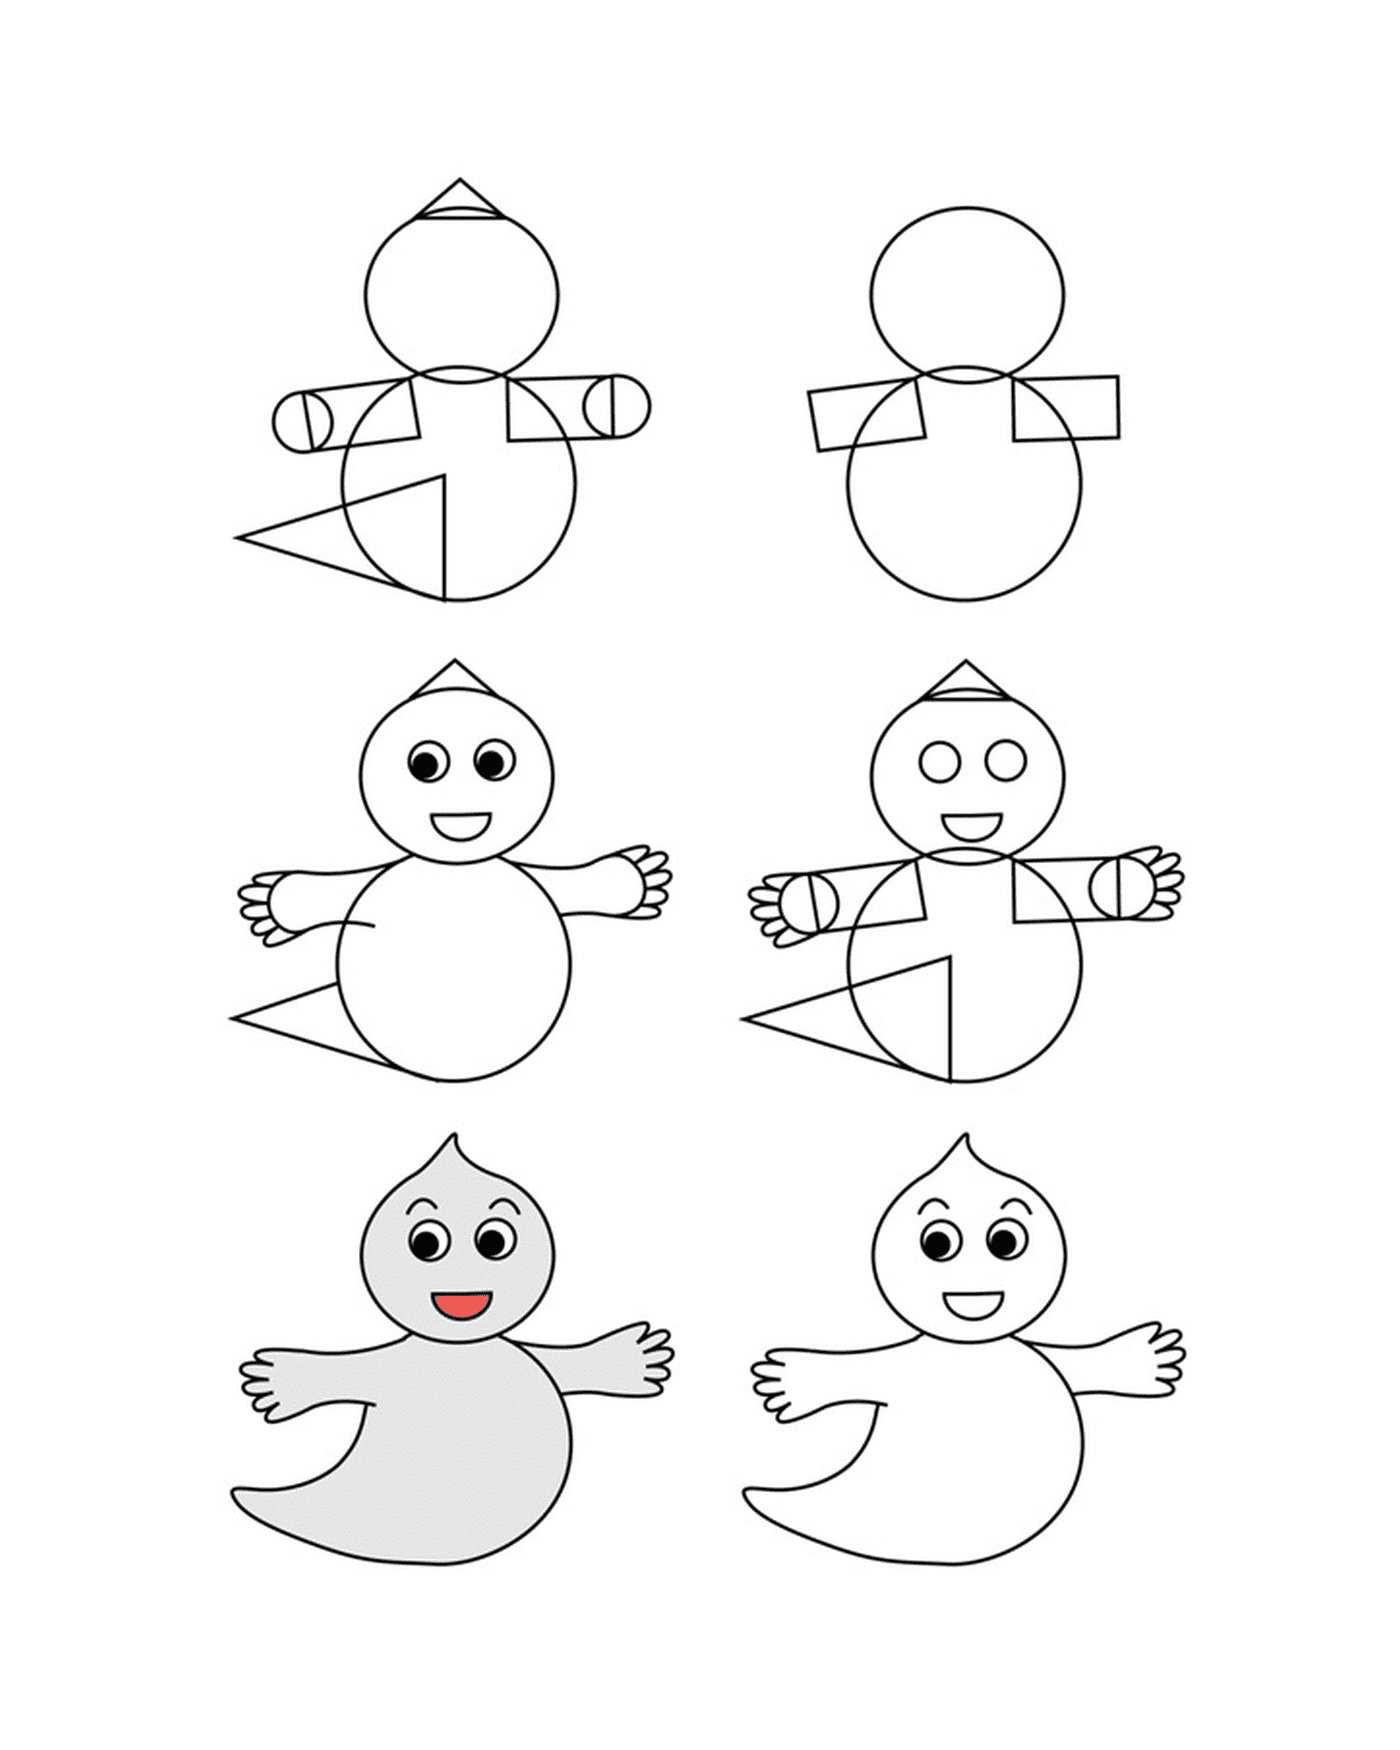  How to draw a ghost 